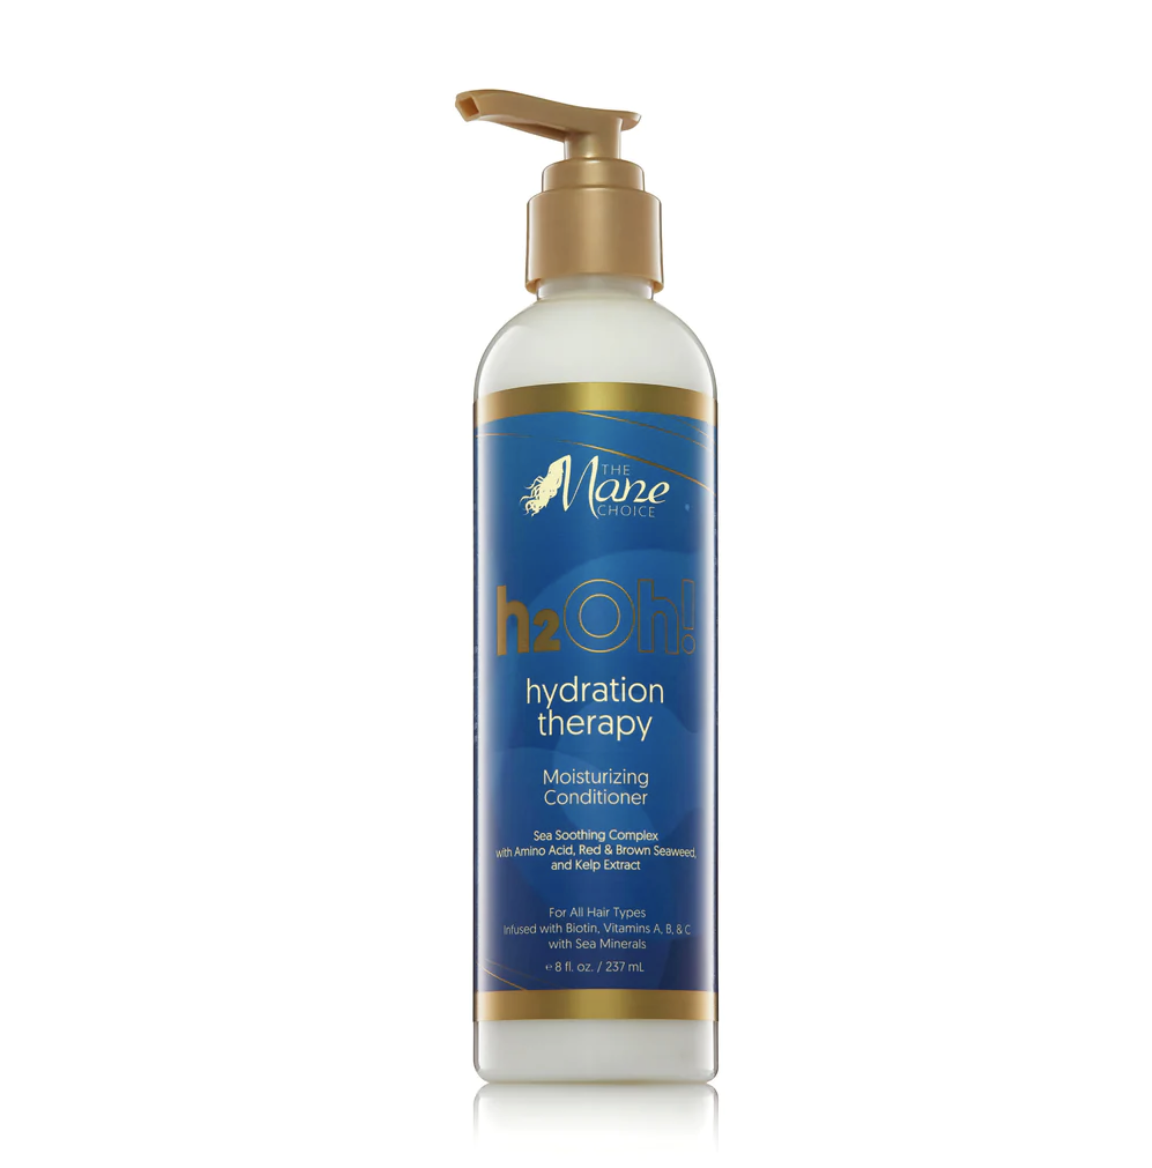 H2 Oh!Hydration Therapy Moisturizing Conditioner